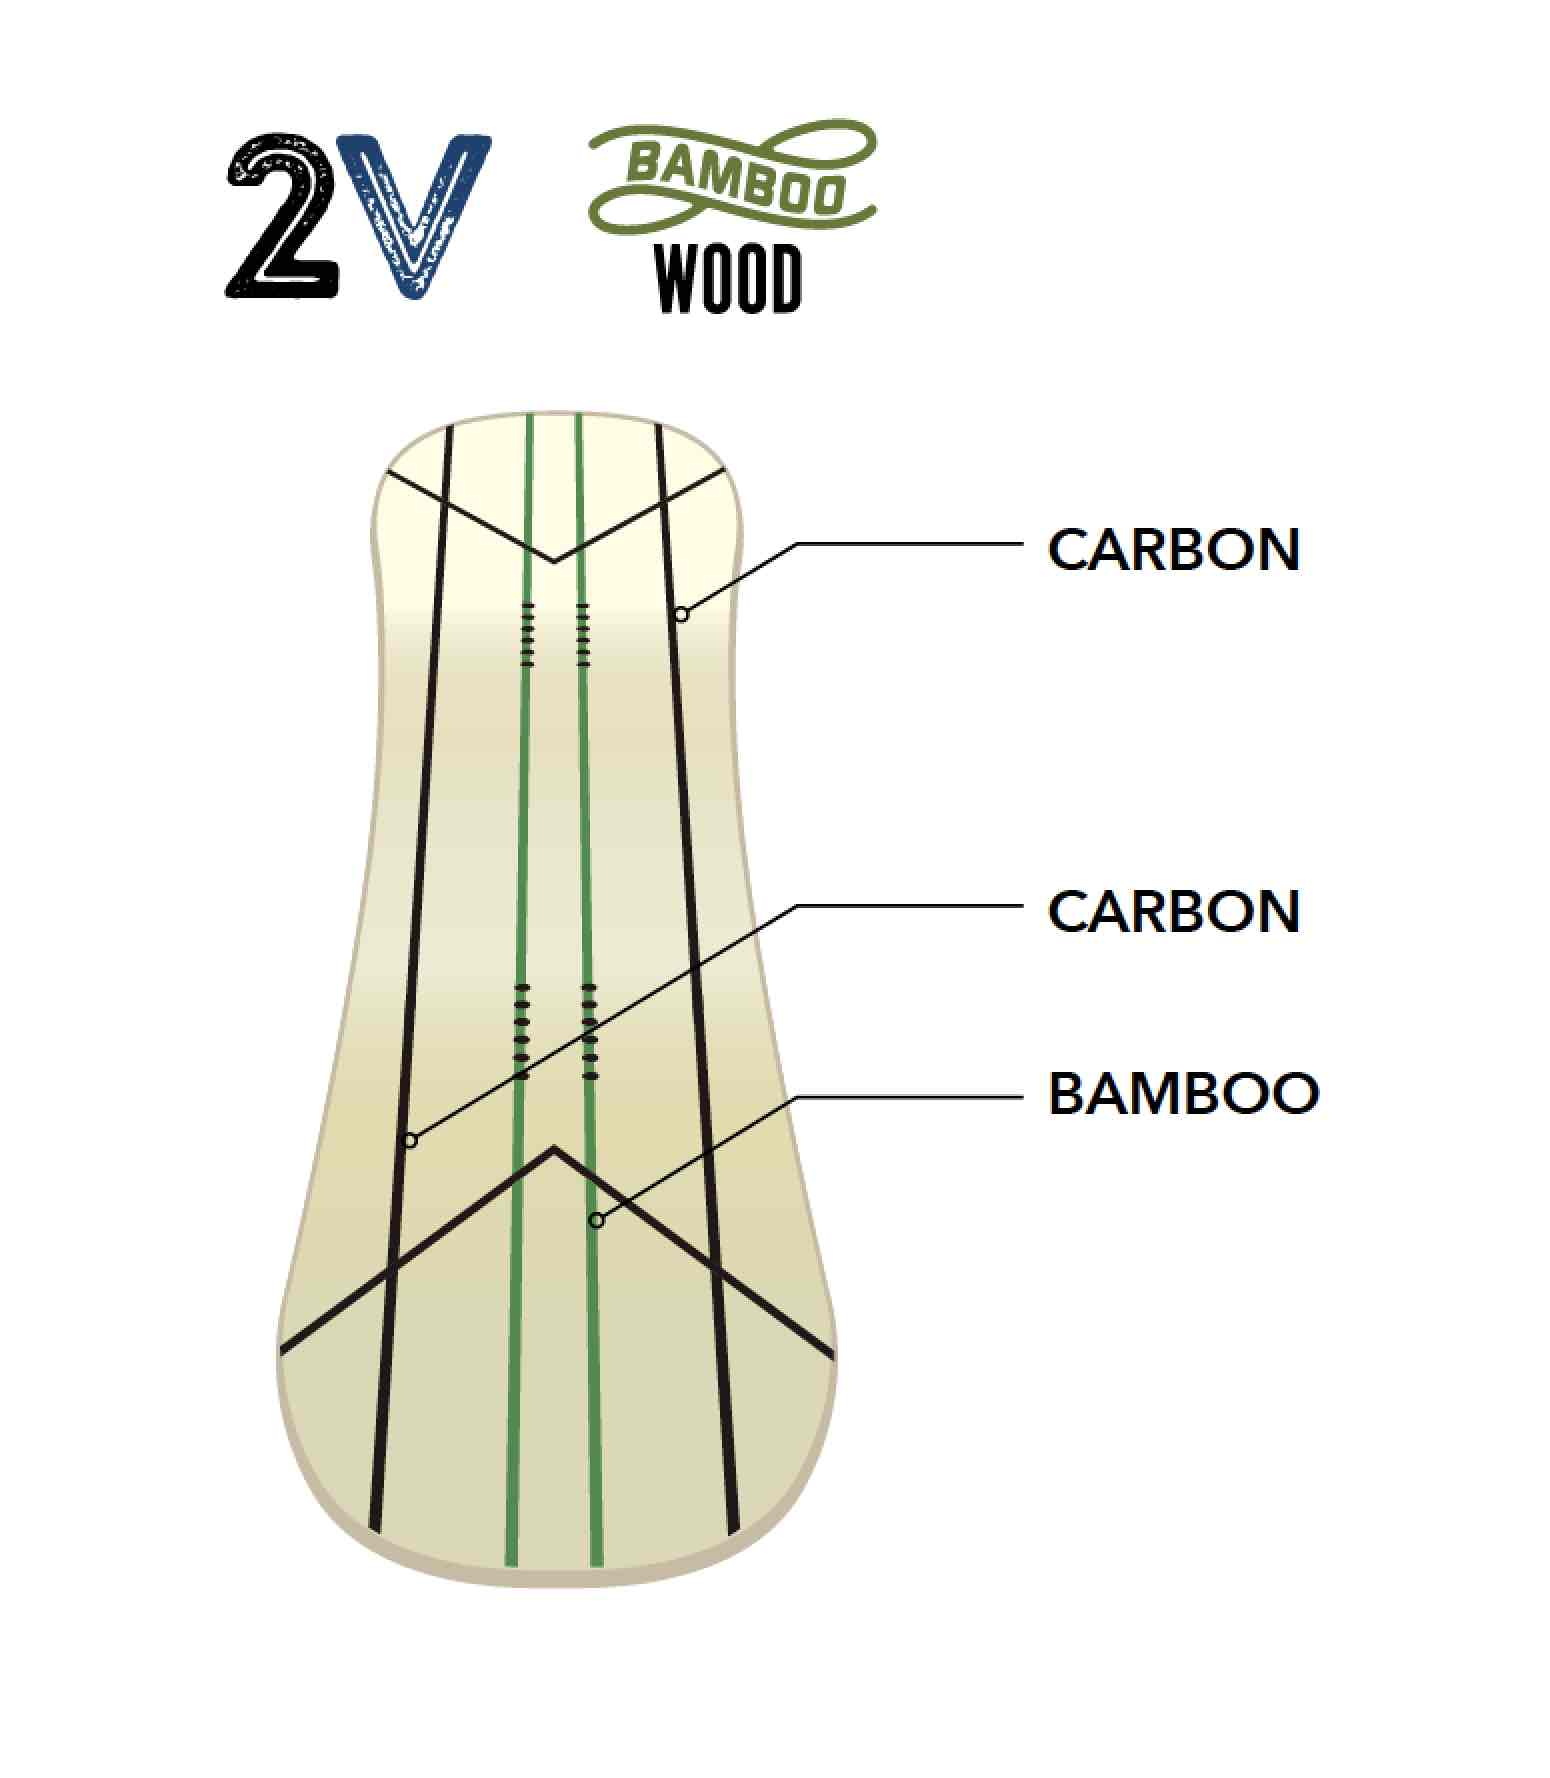 Let's check the double camber and carbon arrangement in detail with illustrations